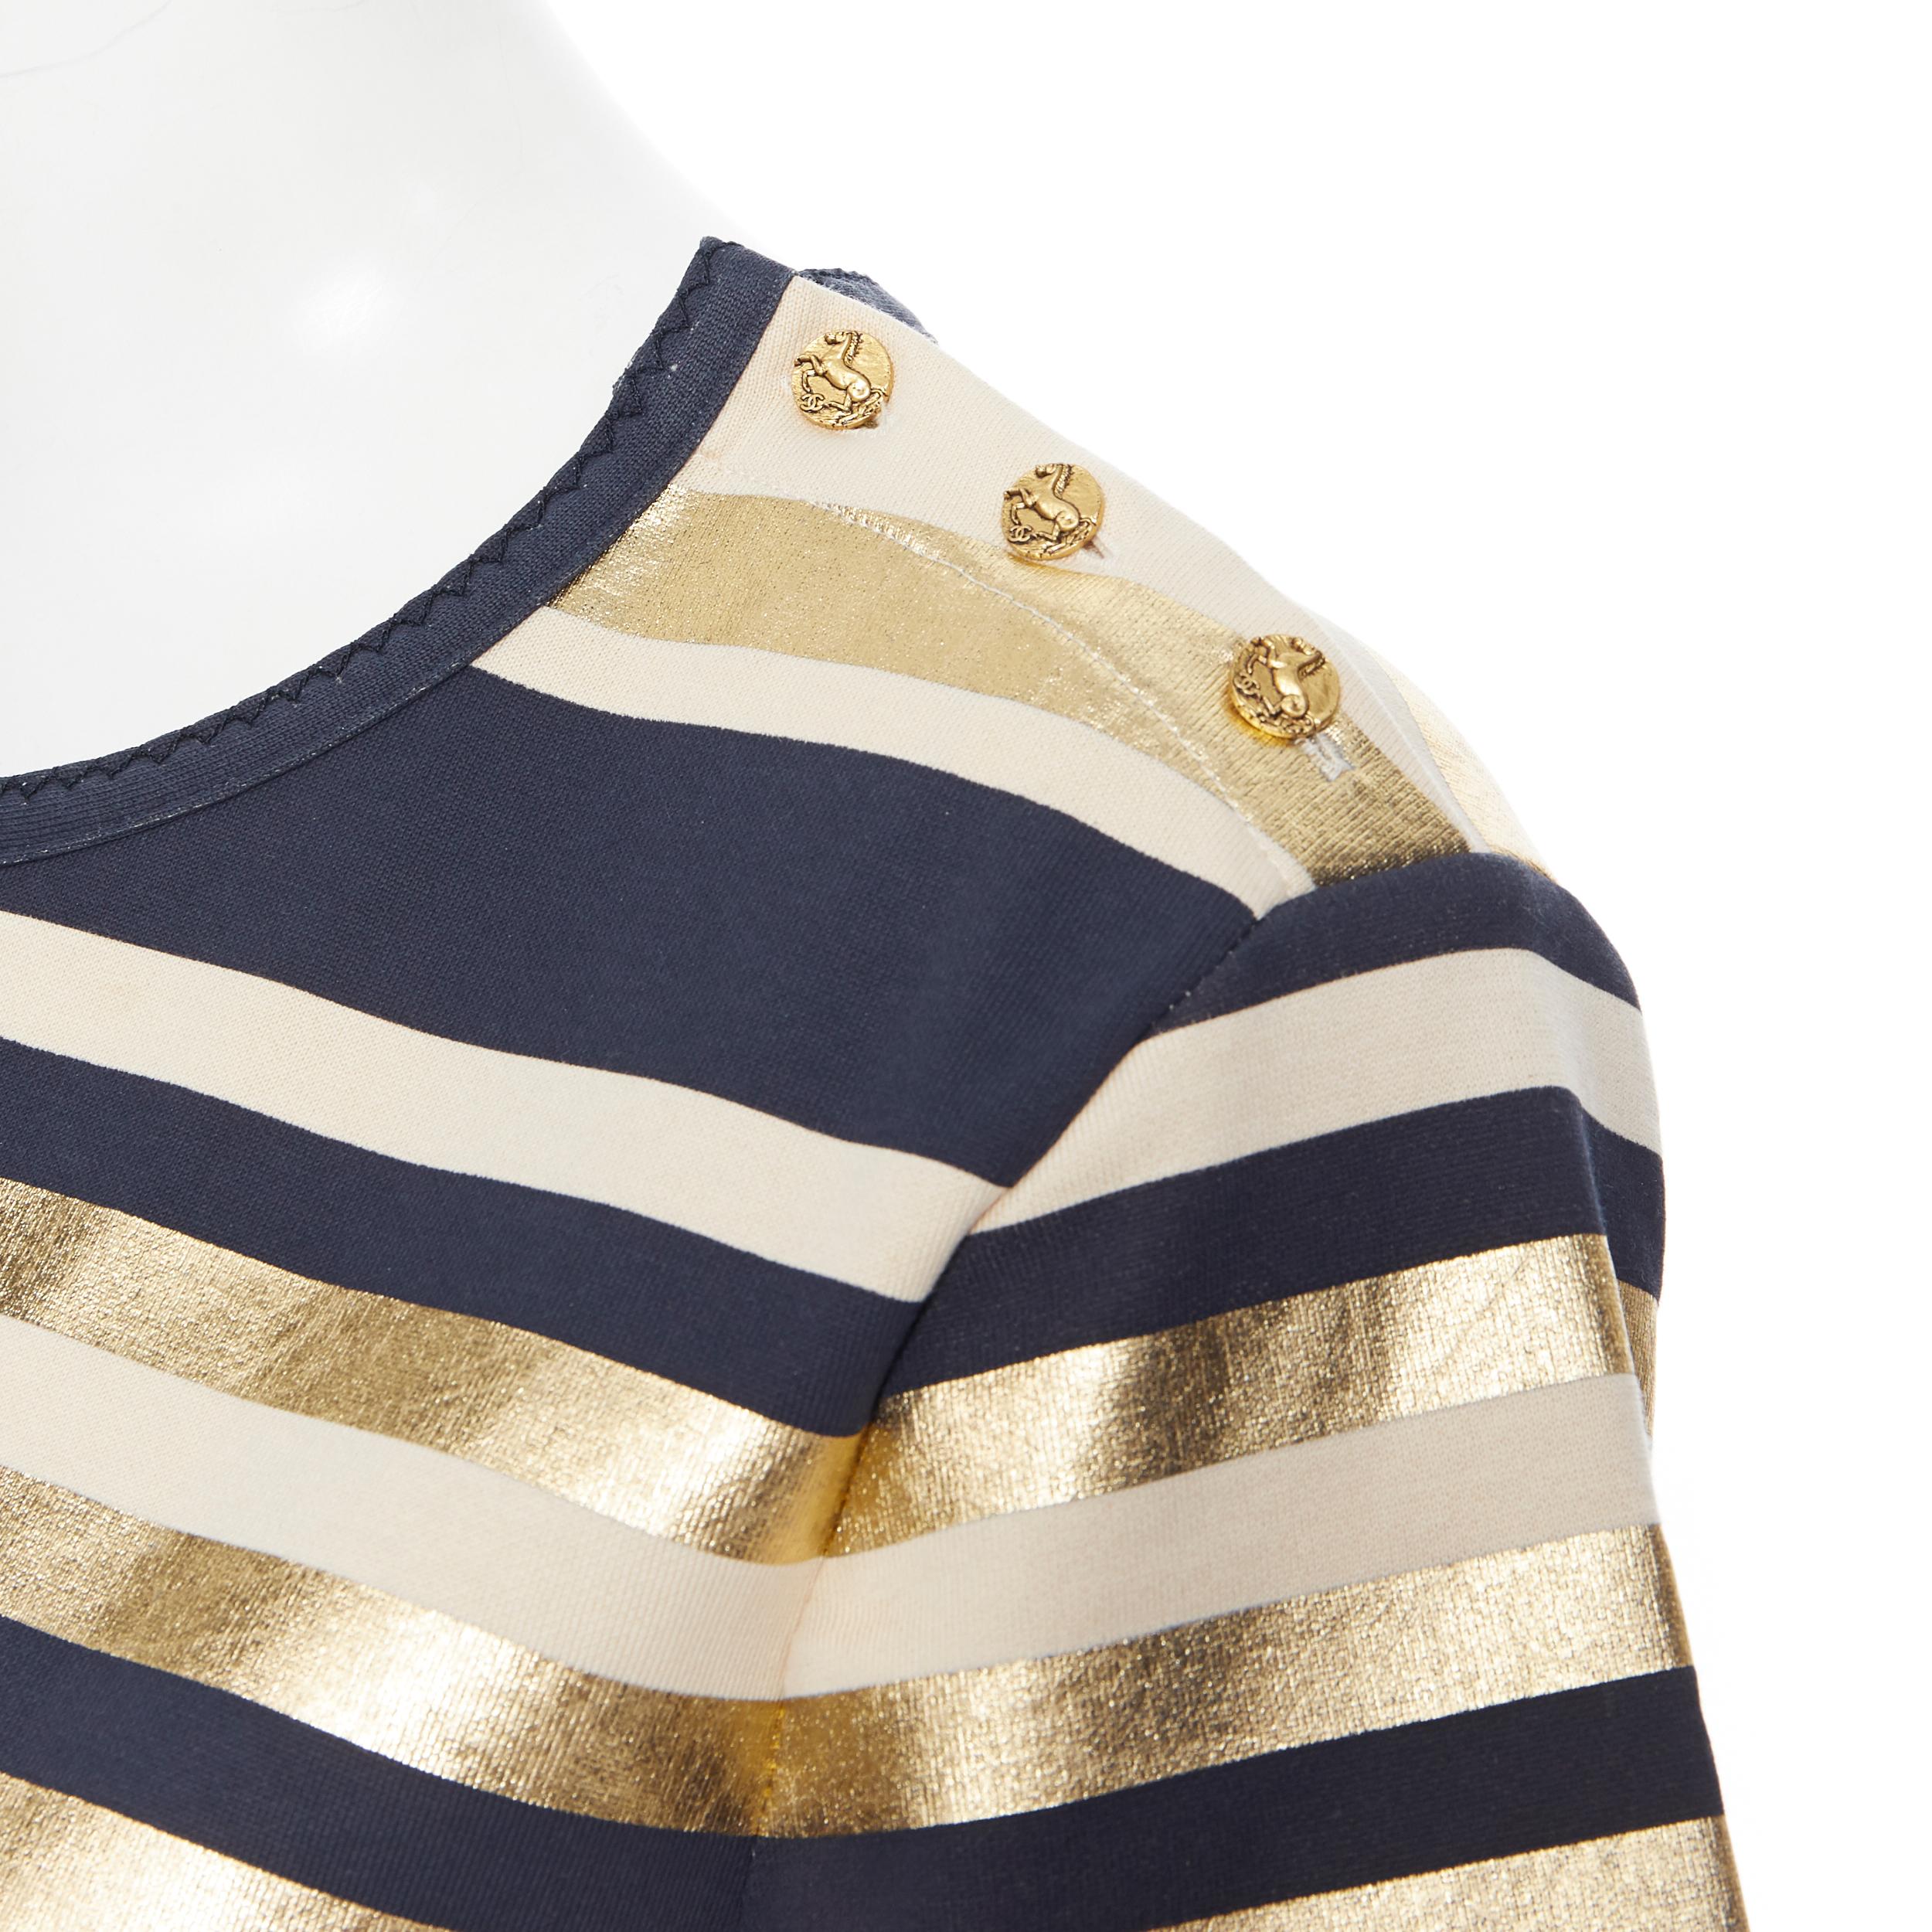 CHANEL 100% cotton metallic gold navy striped gold button short sleeve top FR40
Brand: Chanel
Designer: Karl Lagerfeld
Model Name / Style: T-shirt
Material: Cotton
Color: Gold, navy
Pattern: Striped
Closure: Button
Extra Detail: Gold tone hammered